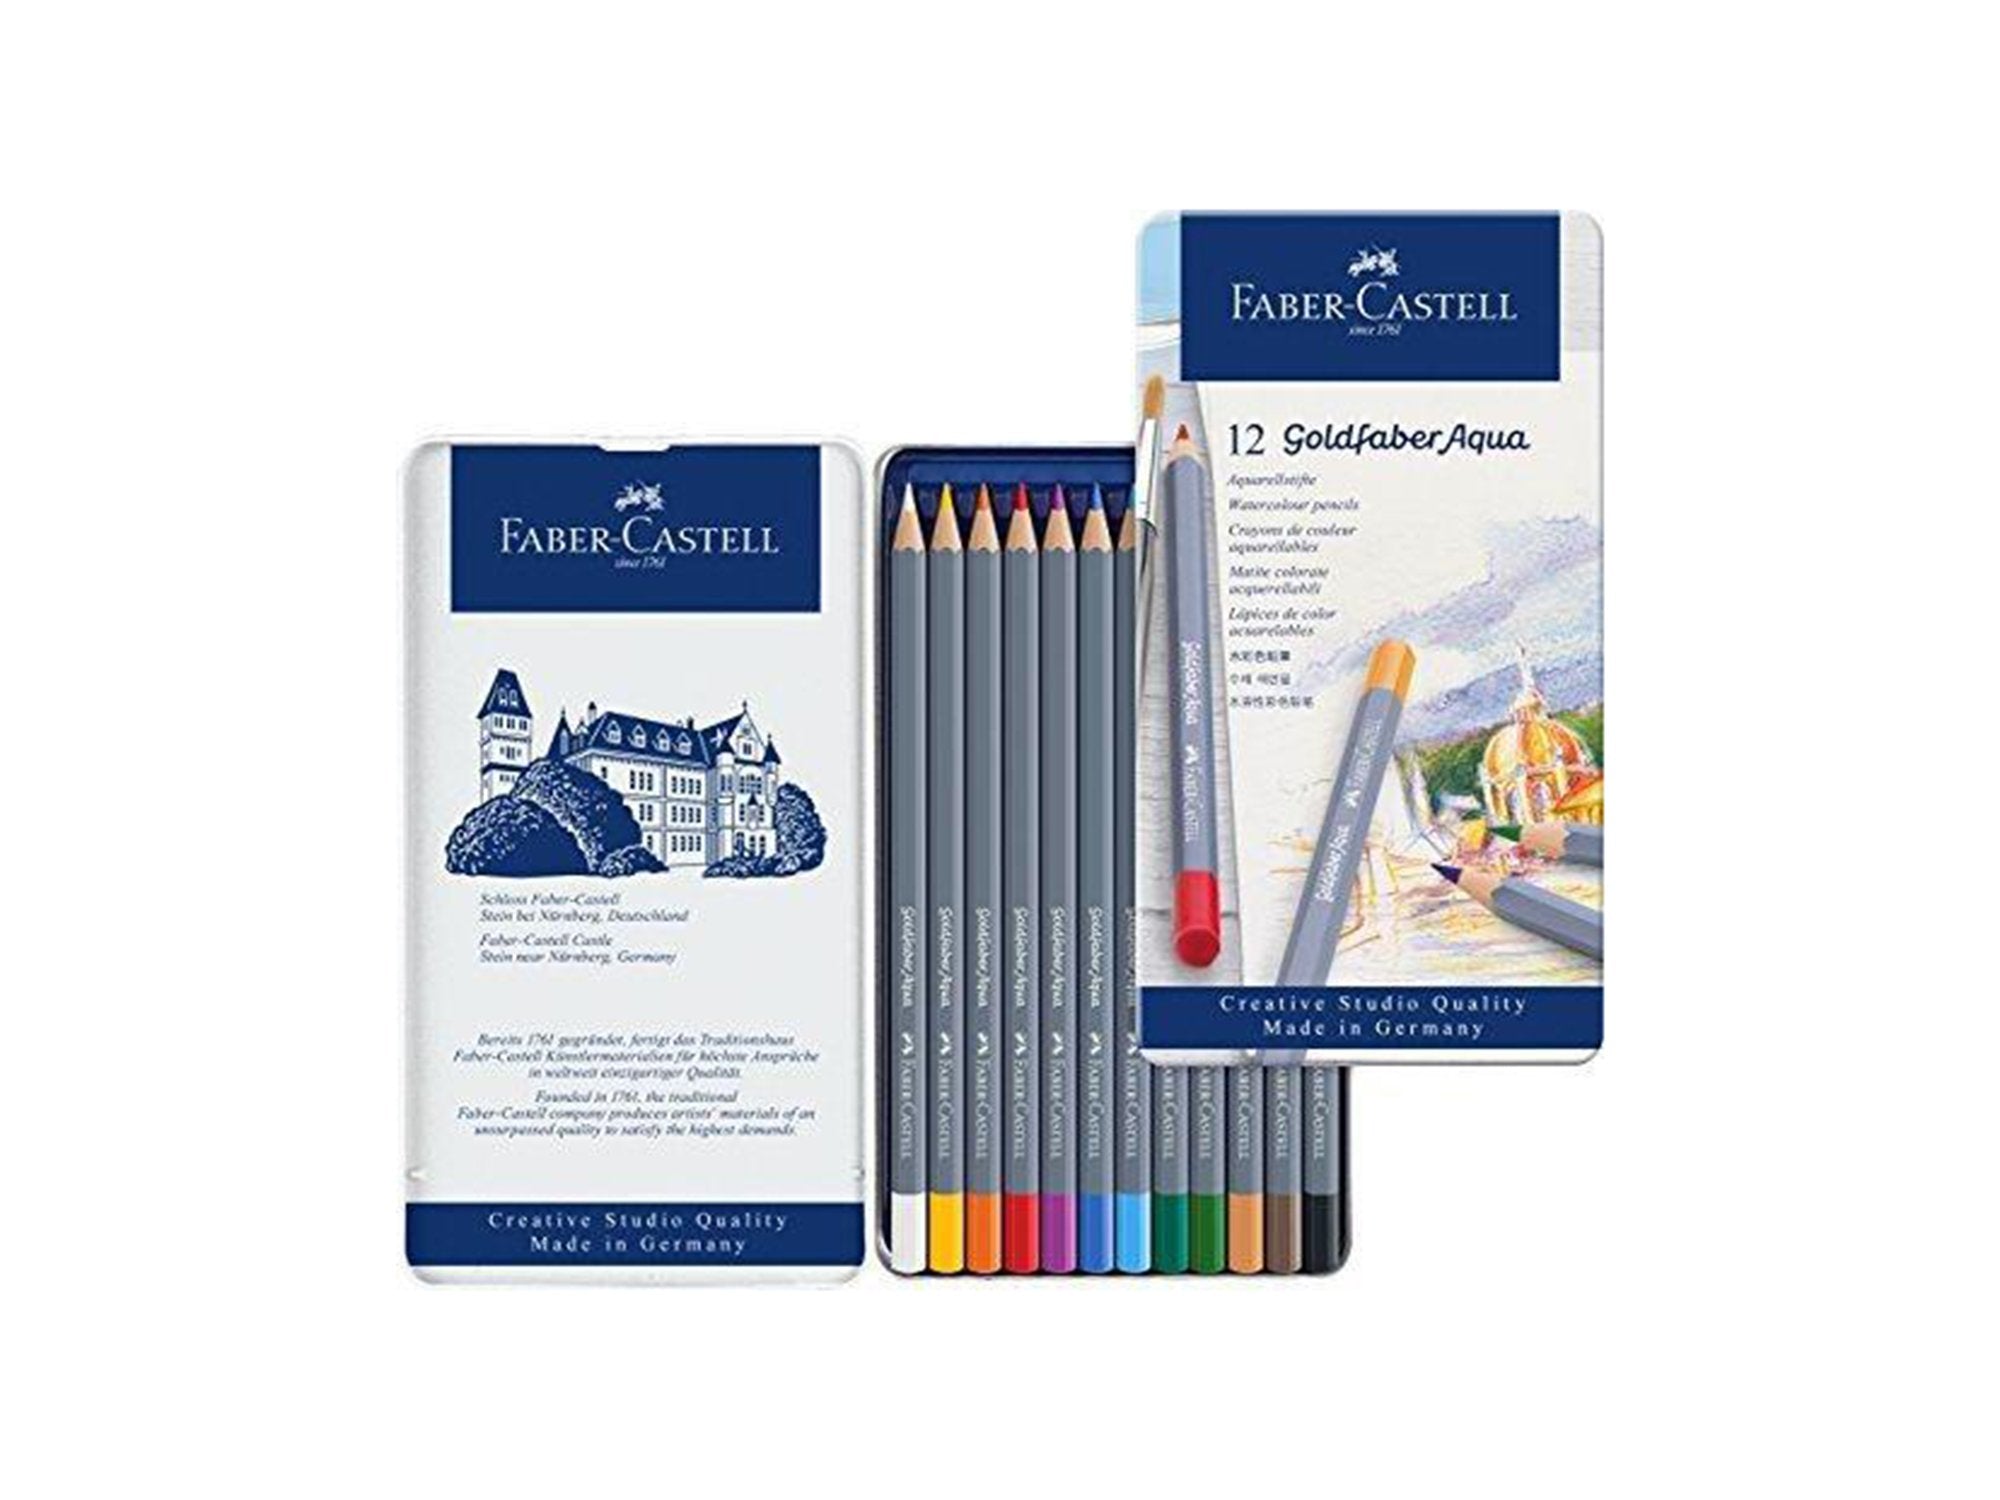 Faber-Castell Art on The Go Watercolor Pencils Set - Travel Watercolor Kit  with 10 Goldfaber Watercolor Pencils, Pencil Pouch, No Mess Sharpener and